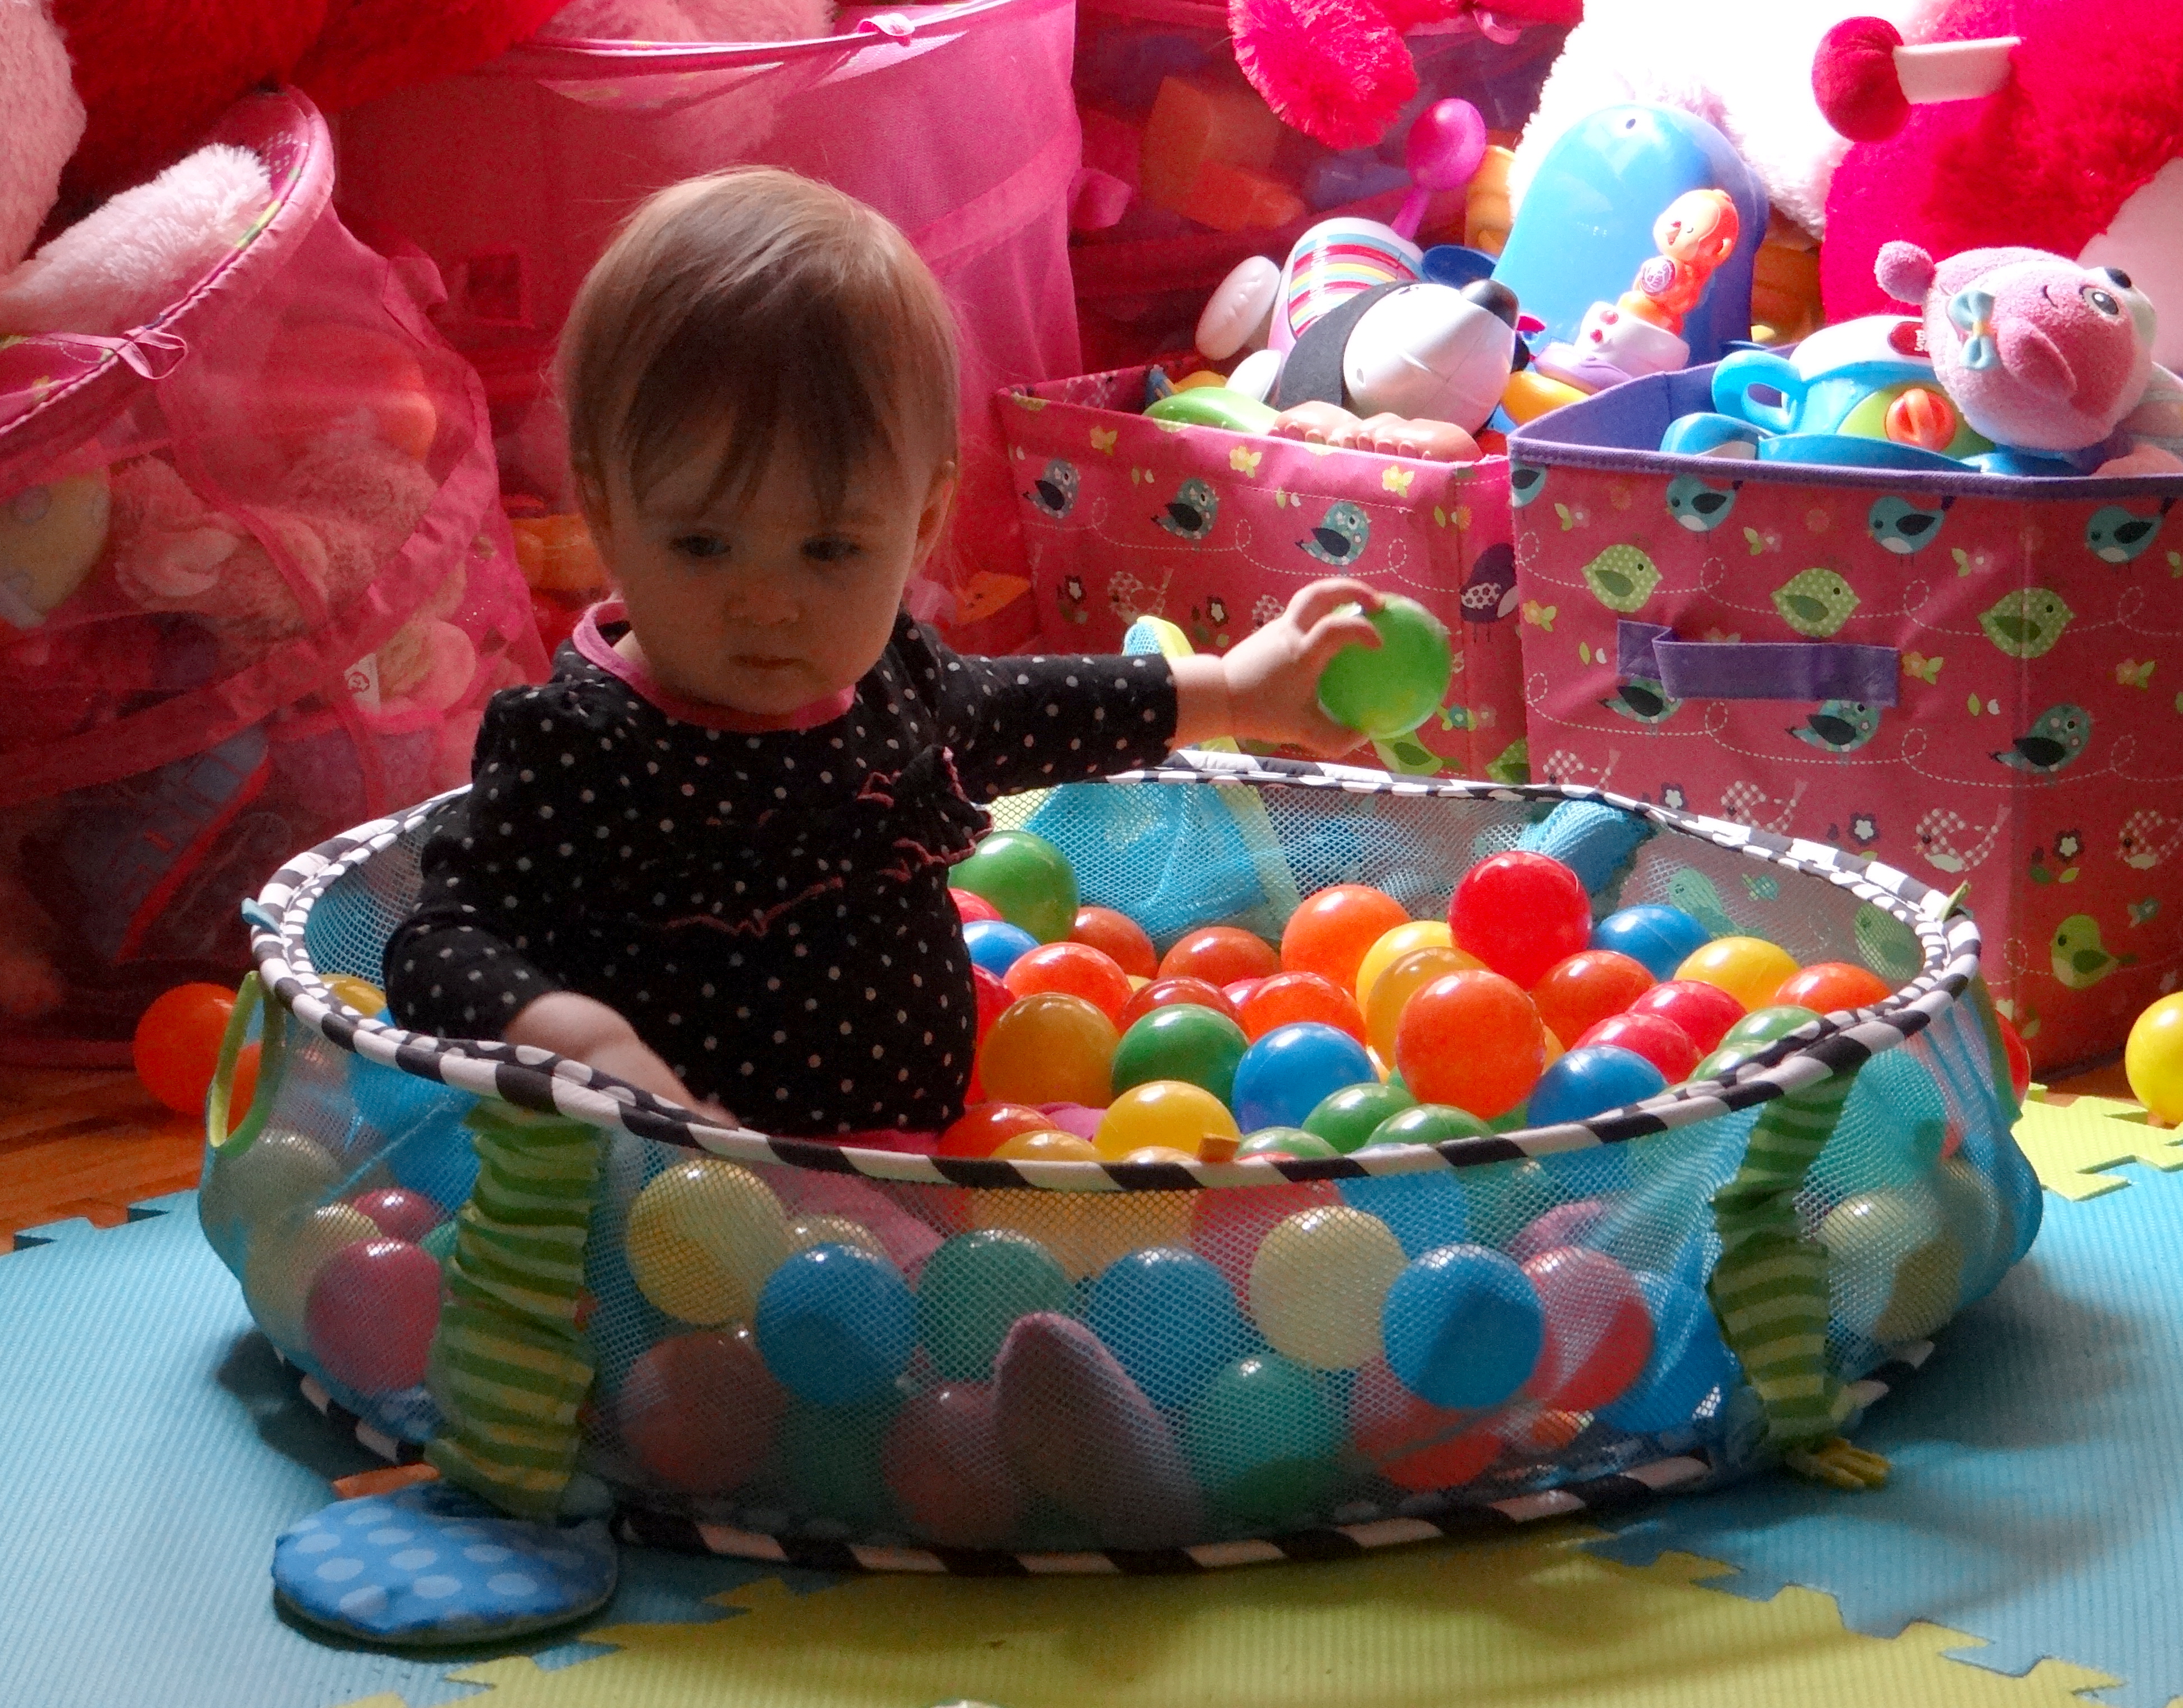 Baby playing in a ball pit